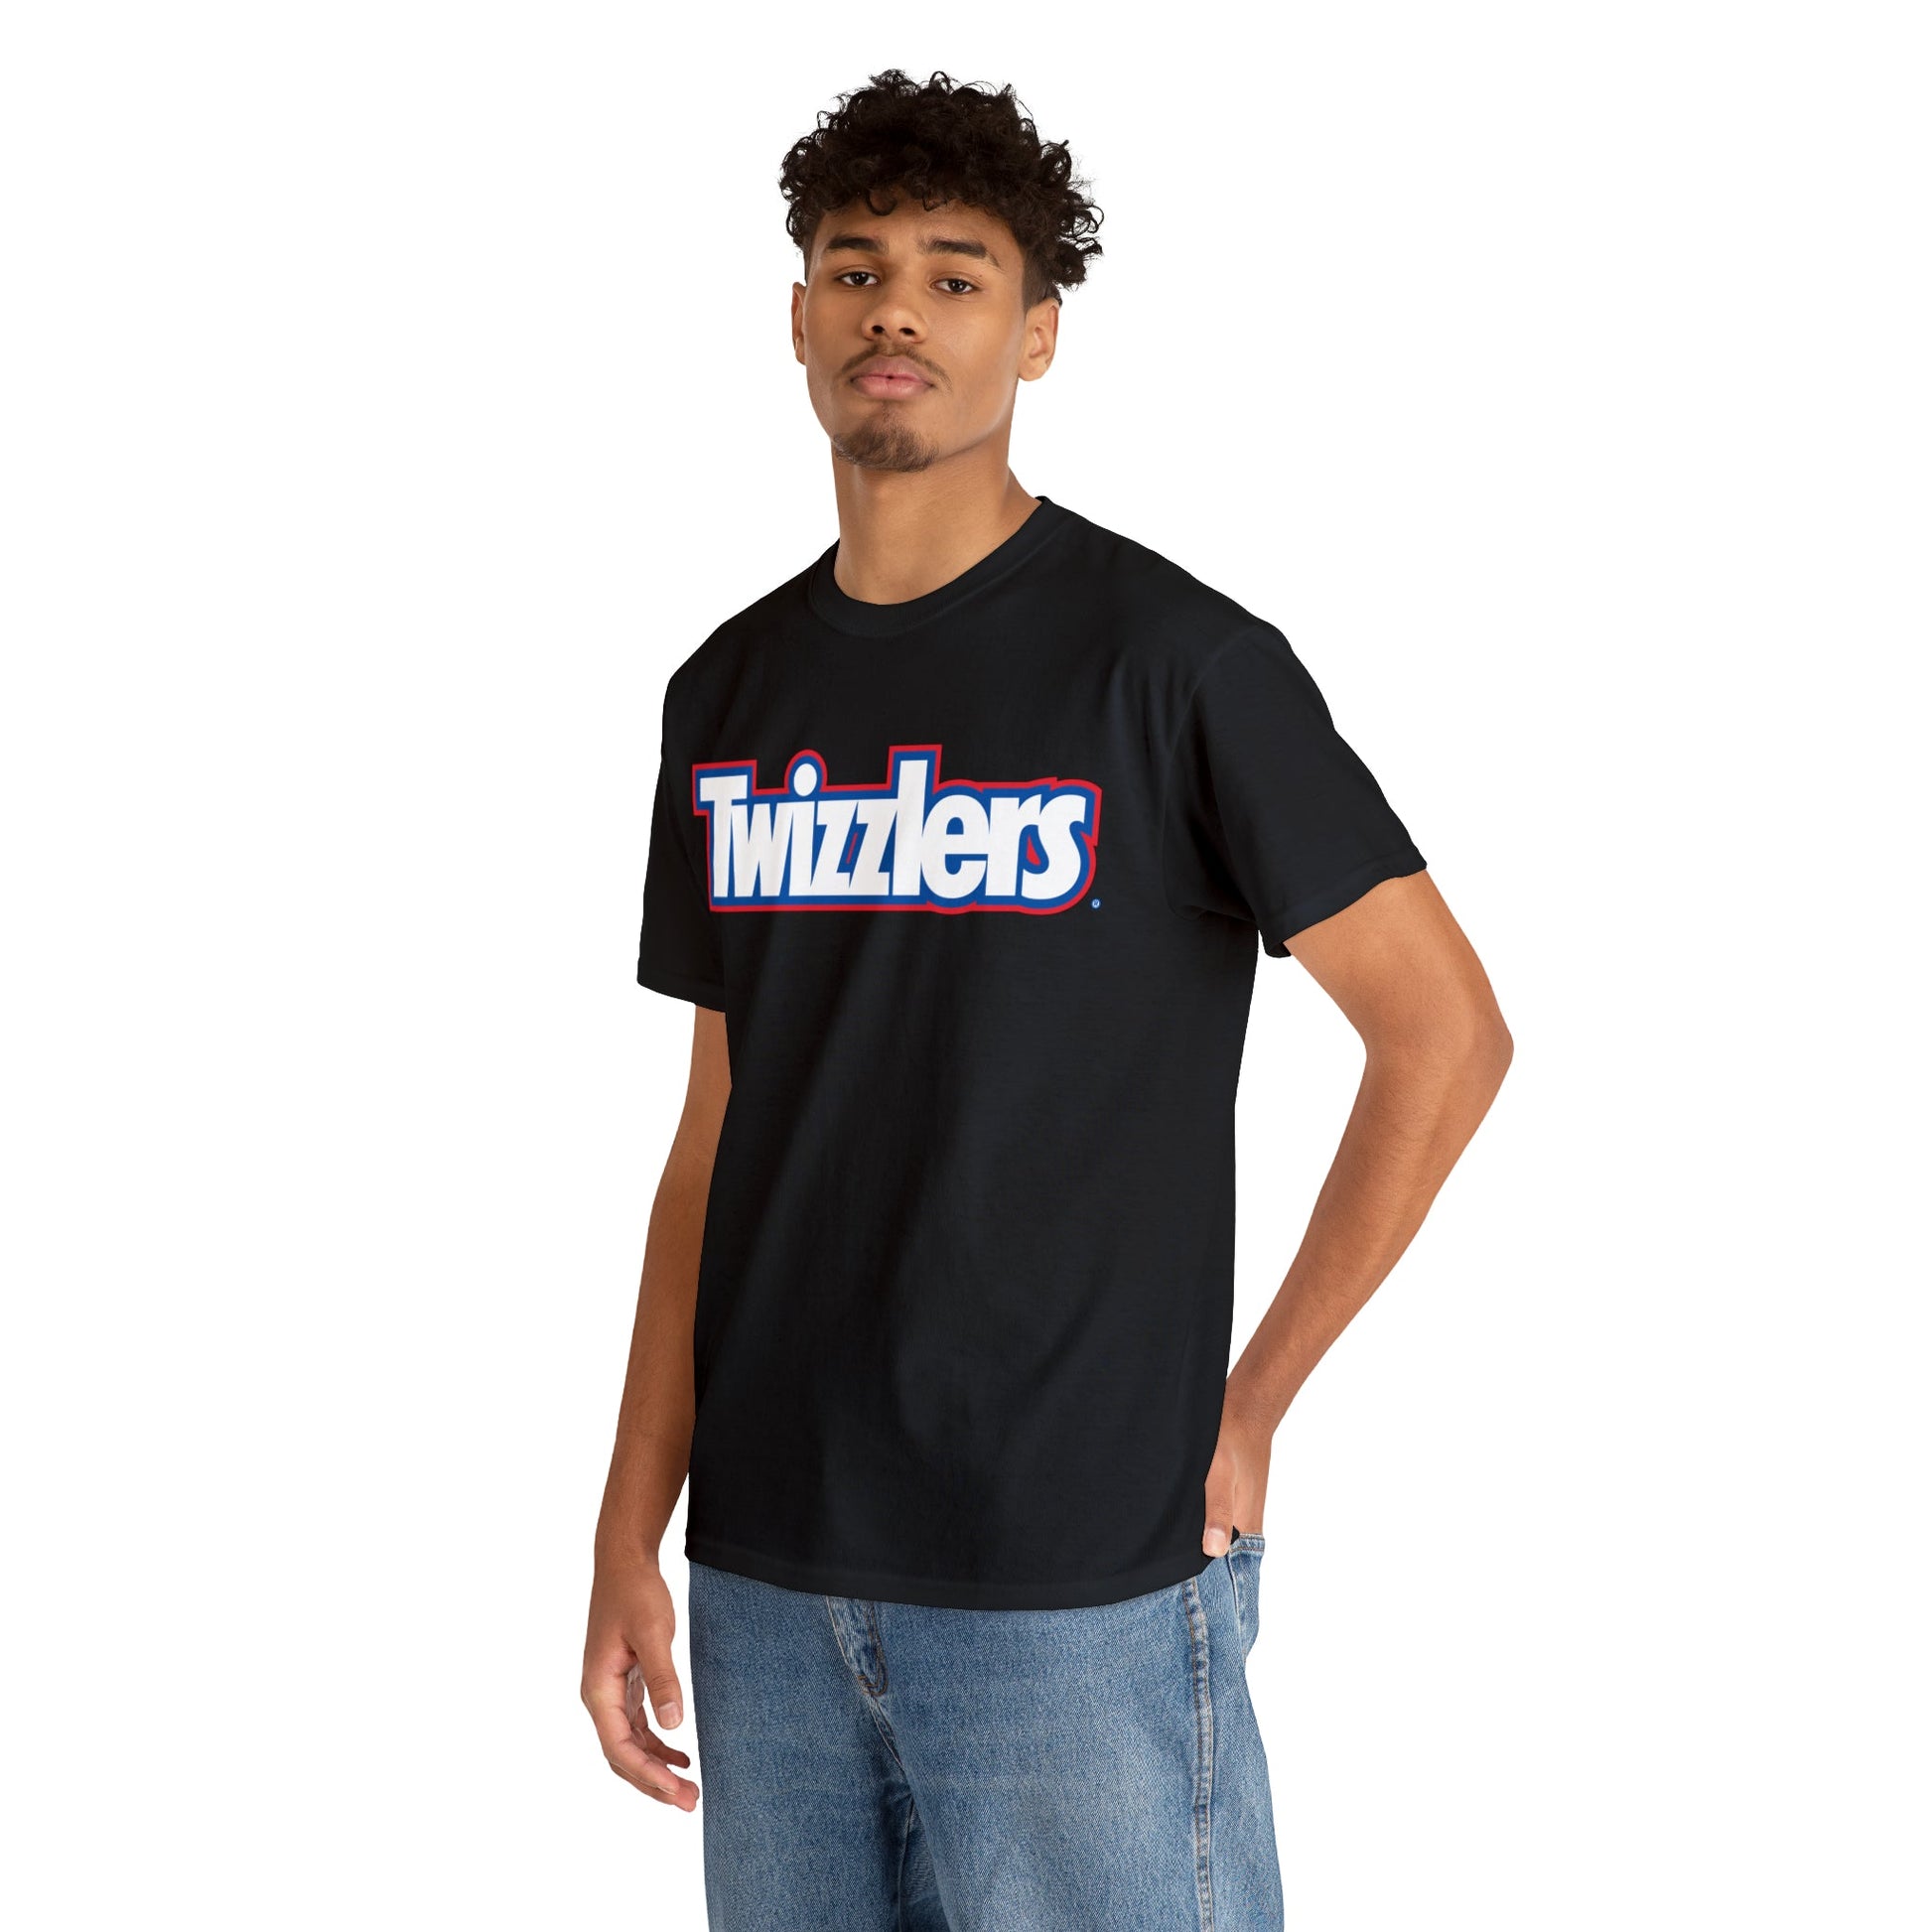 Twizzlers Candy Logo T-Shirt - RetroTeeShop